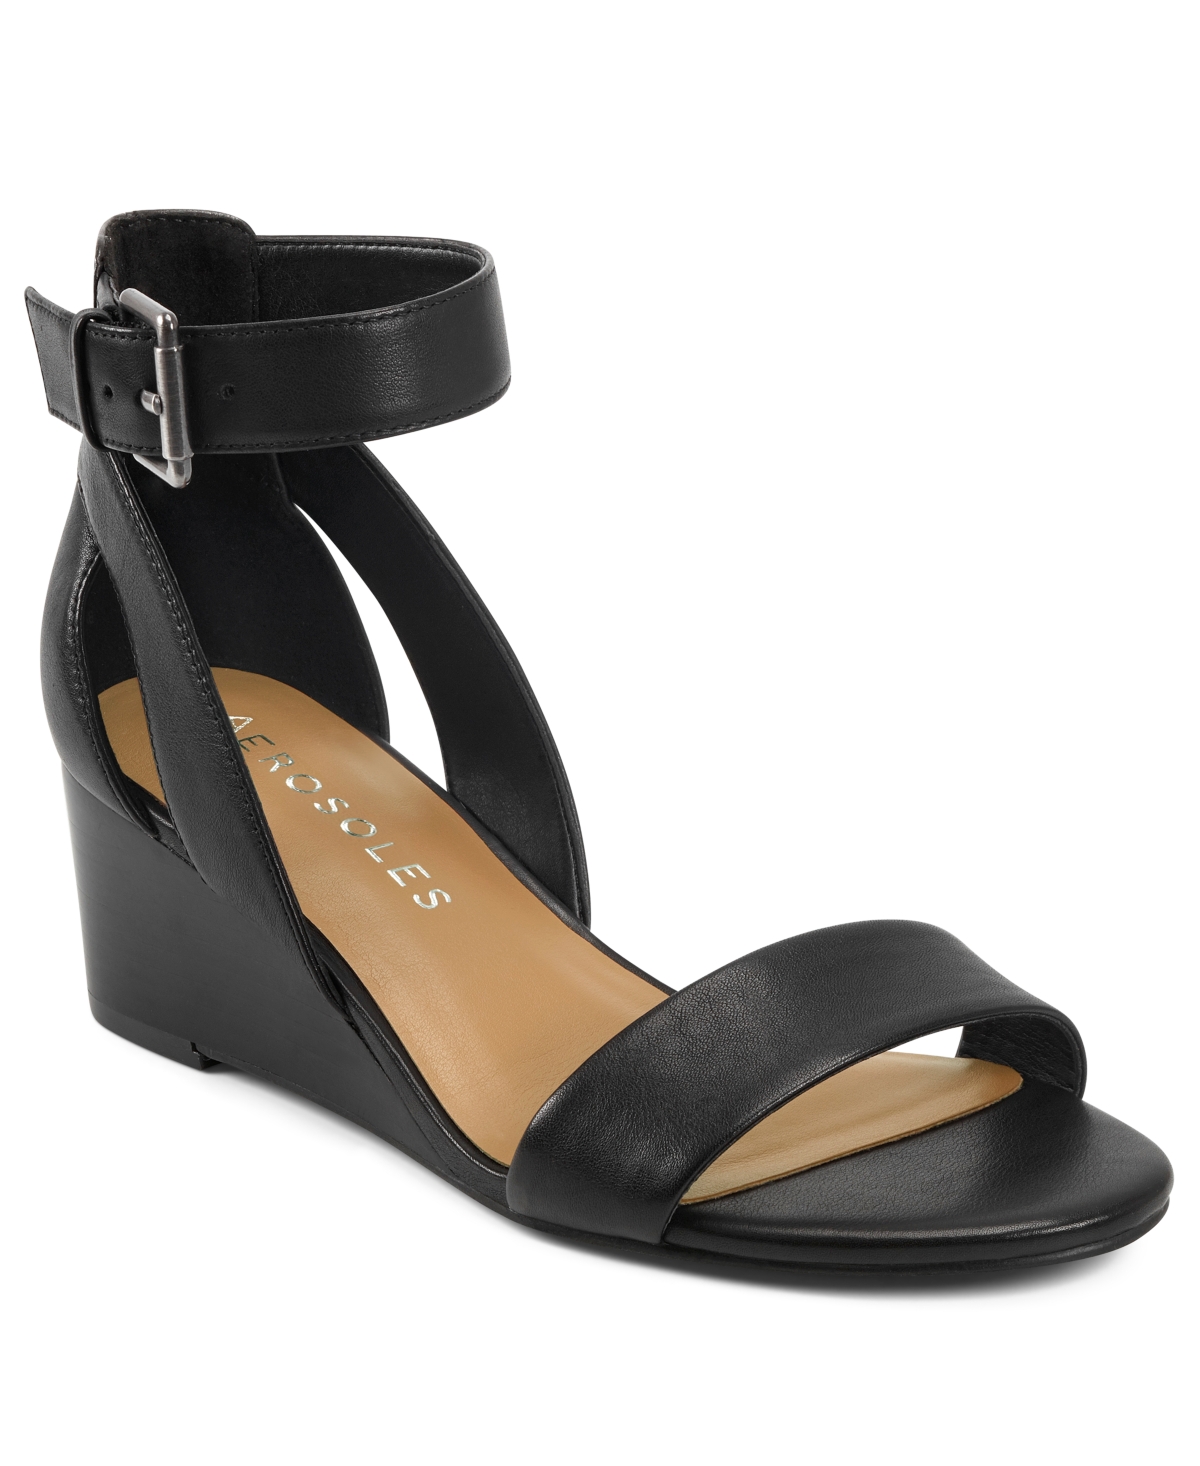 UPC 887039887525 product image for Aerosoles Willowbrook Wedge Sandals Women's Shoes | upcitemdb.com